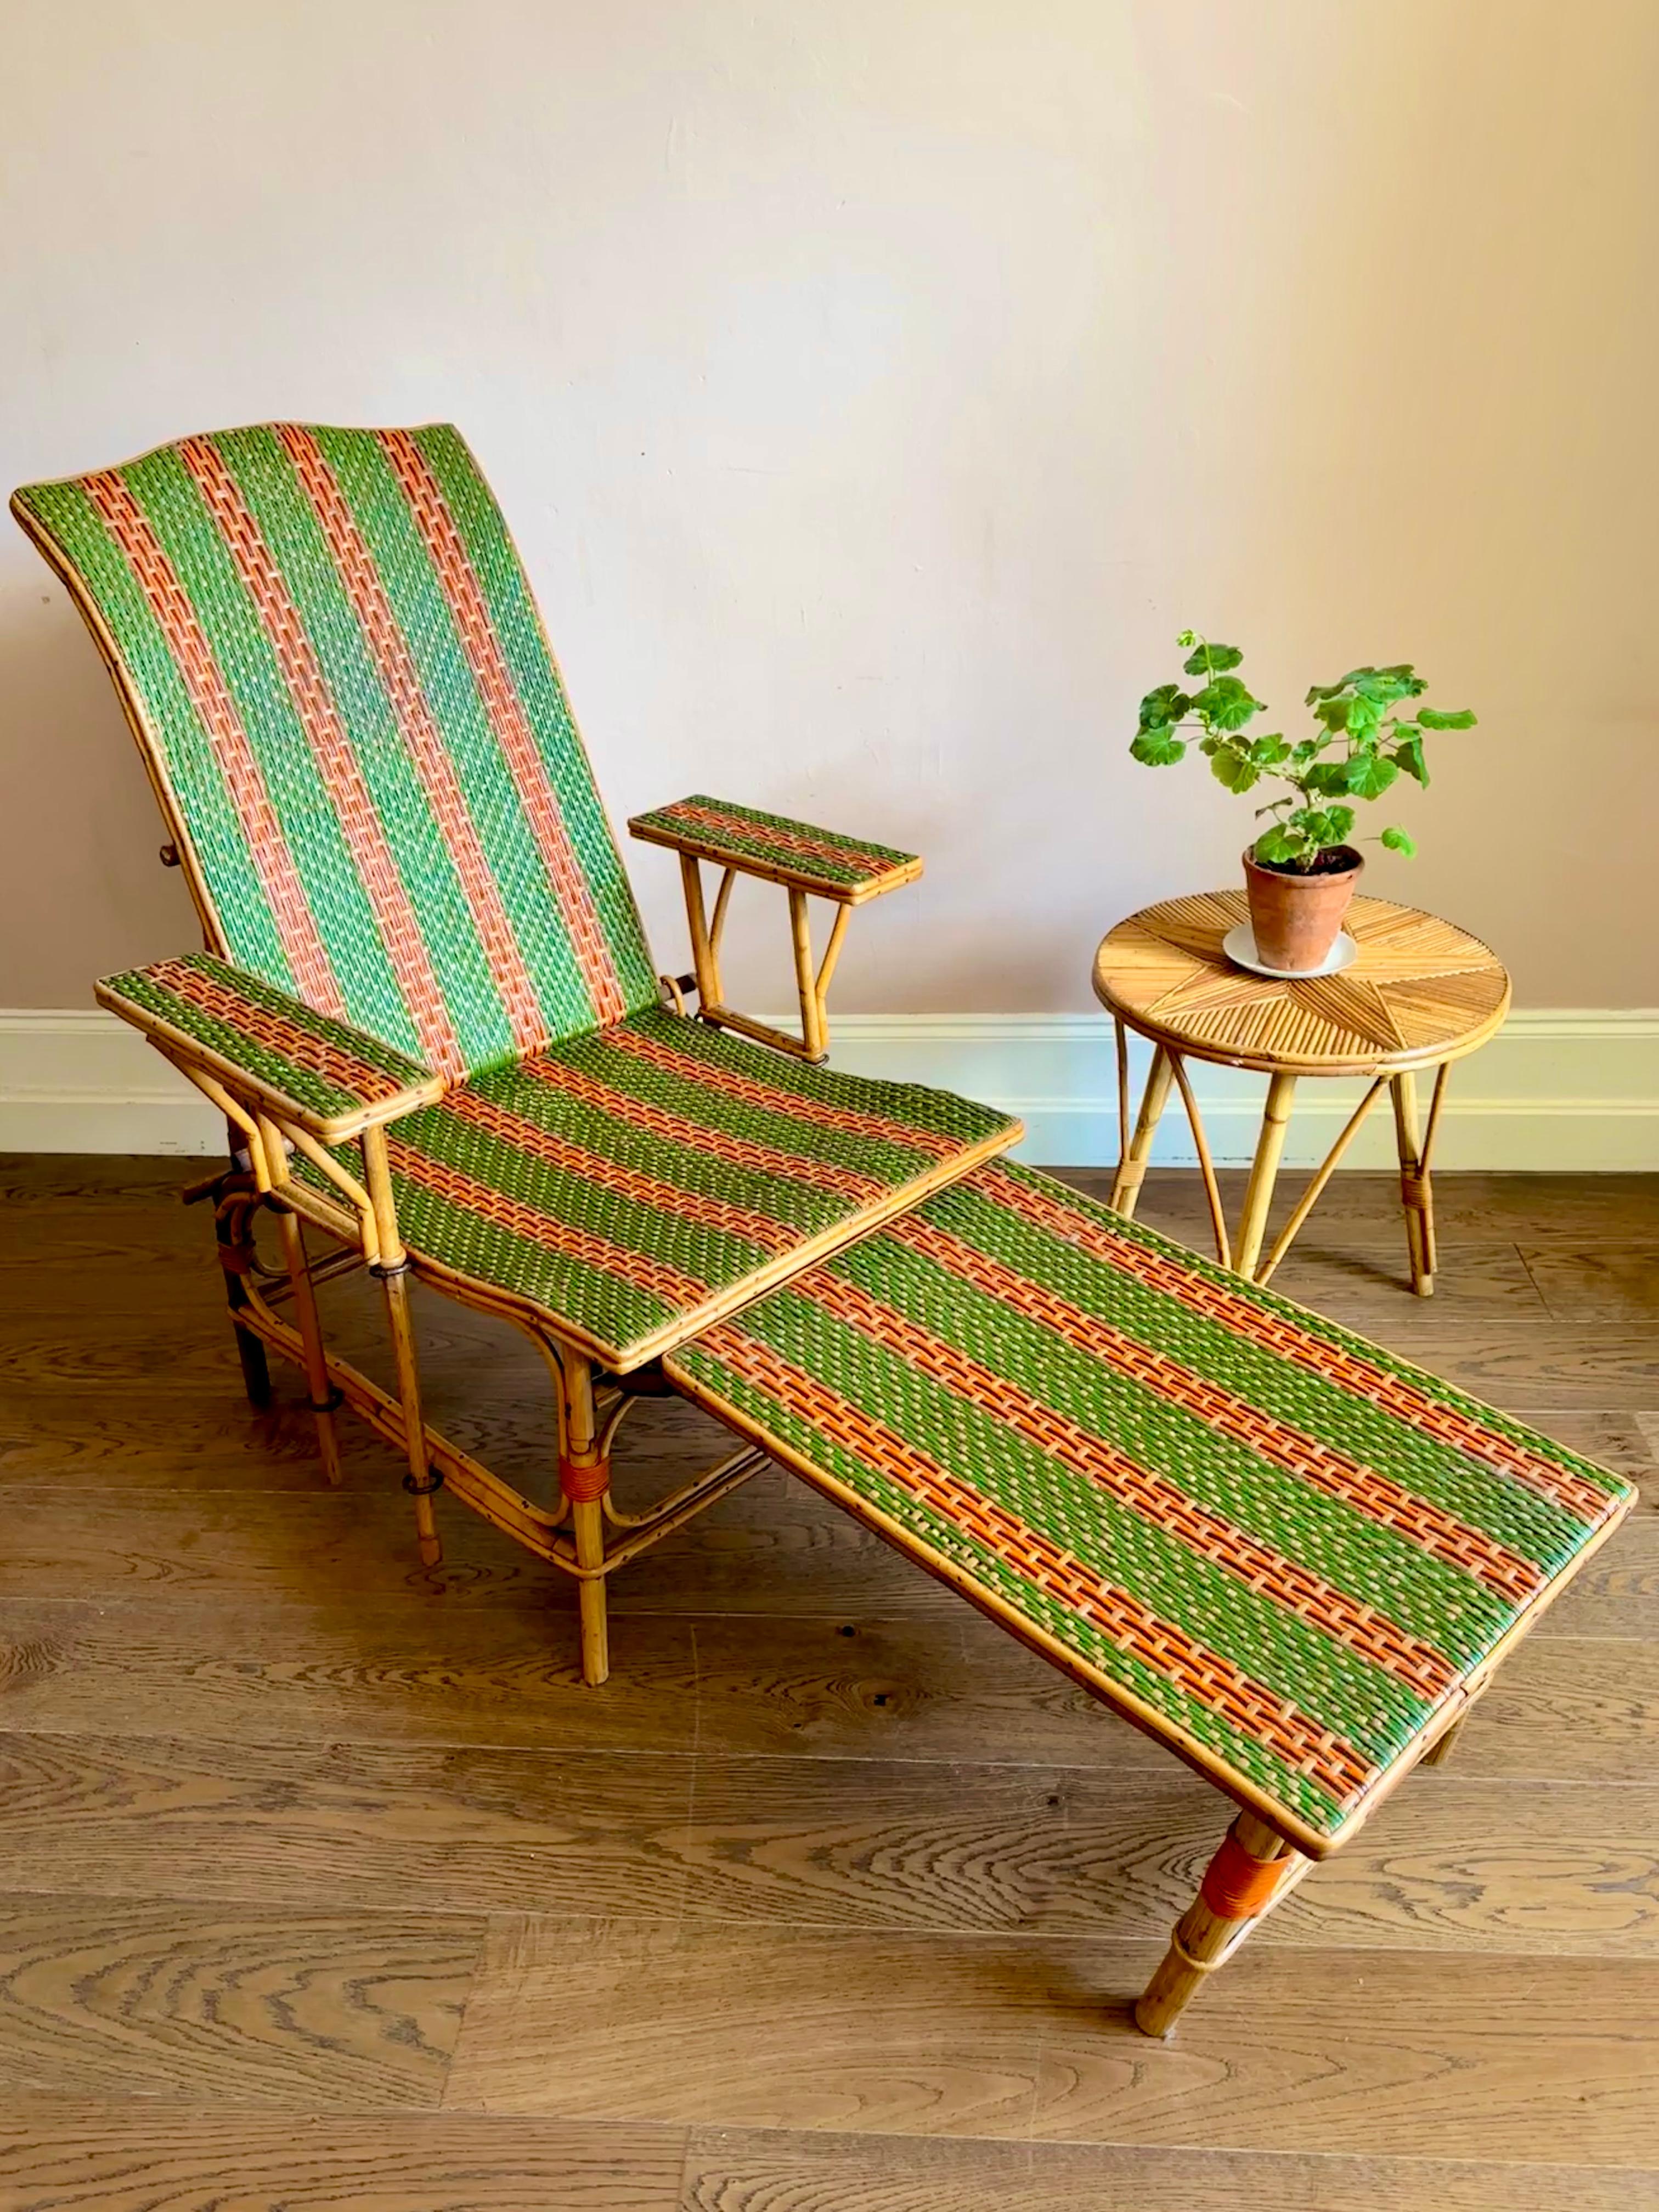 Early C20th French bamboo & rattan chaise longue.

Beautiful and unique adjustable sun lounger, circa 1920, with removable armrests and foot stool. In excellent and sturdy condition with some light wear consistent with age and use. The front right